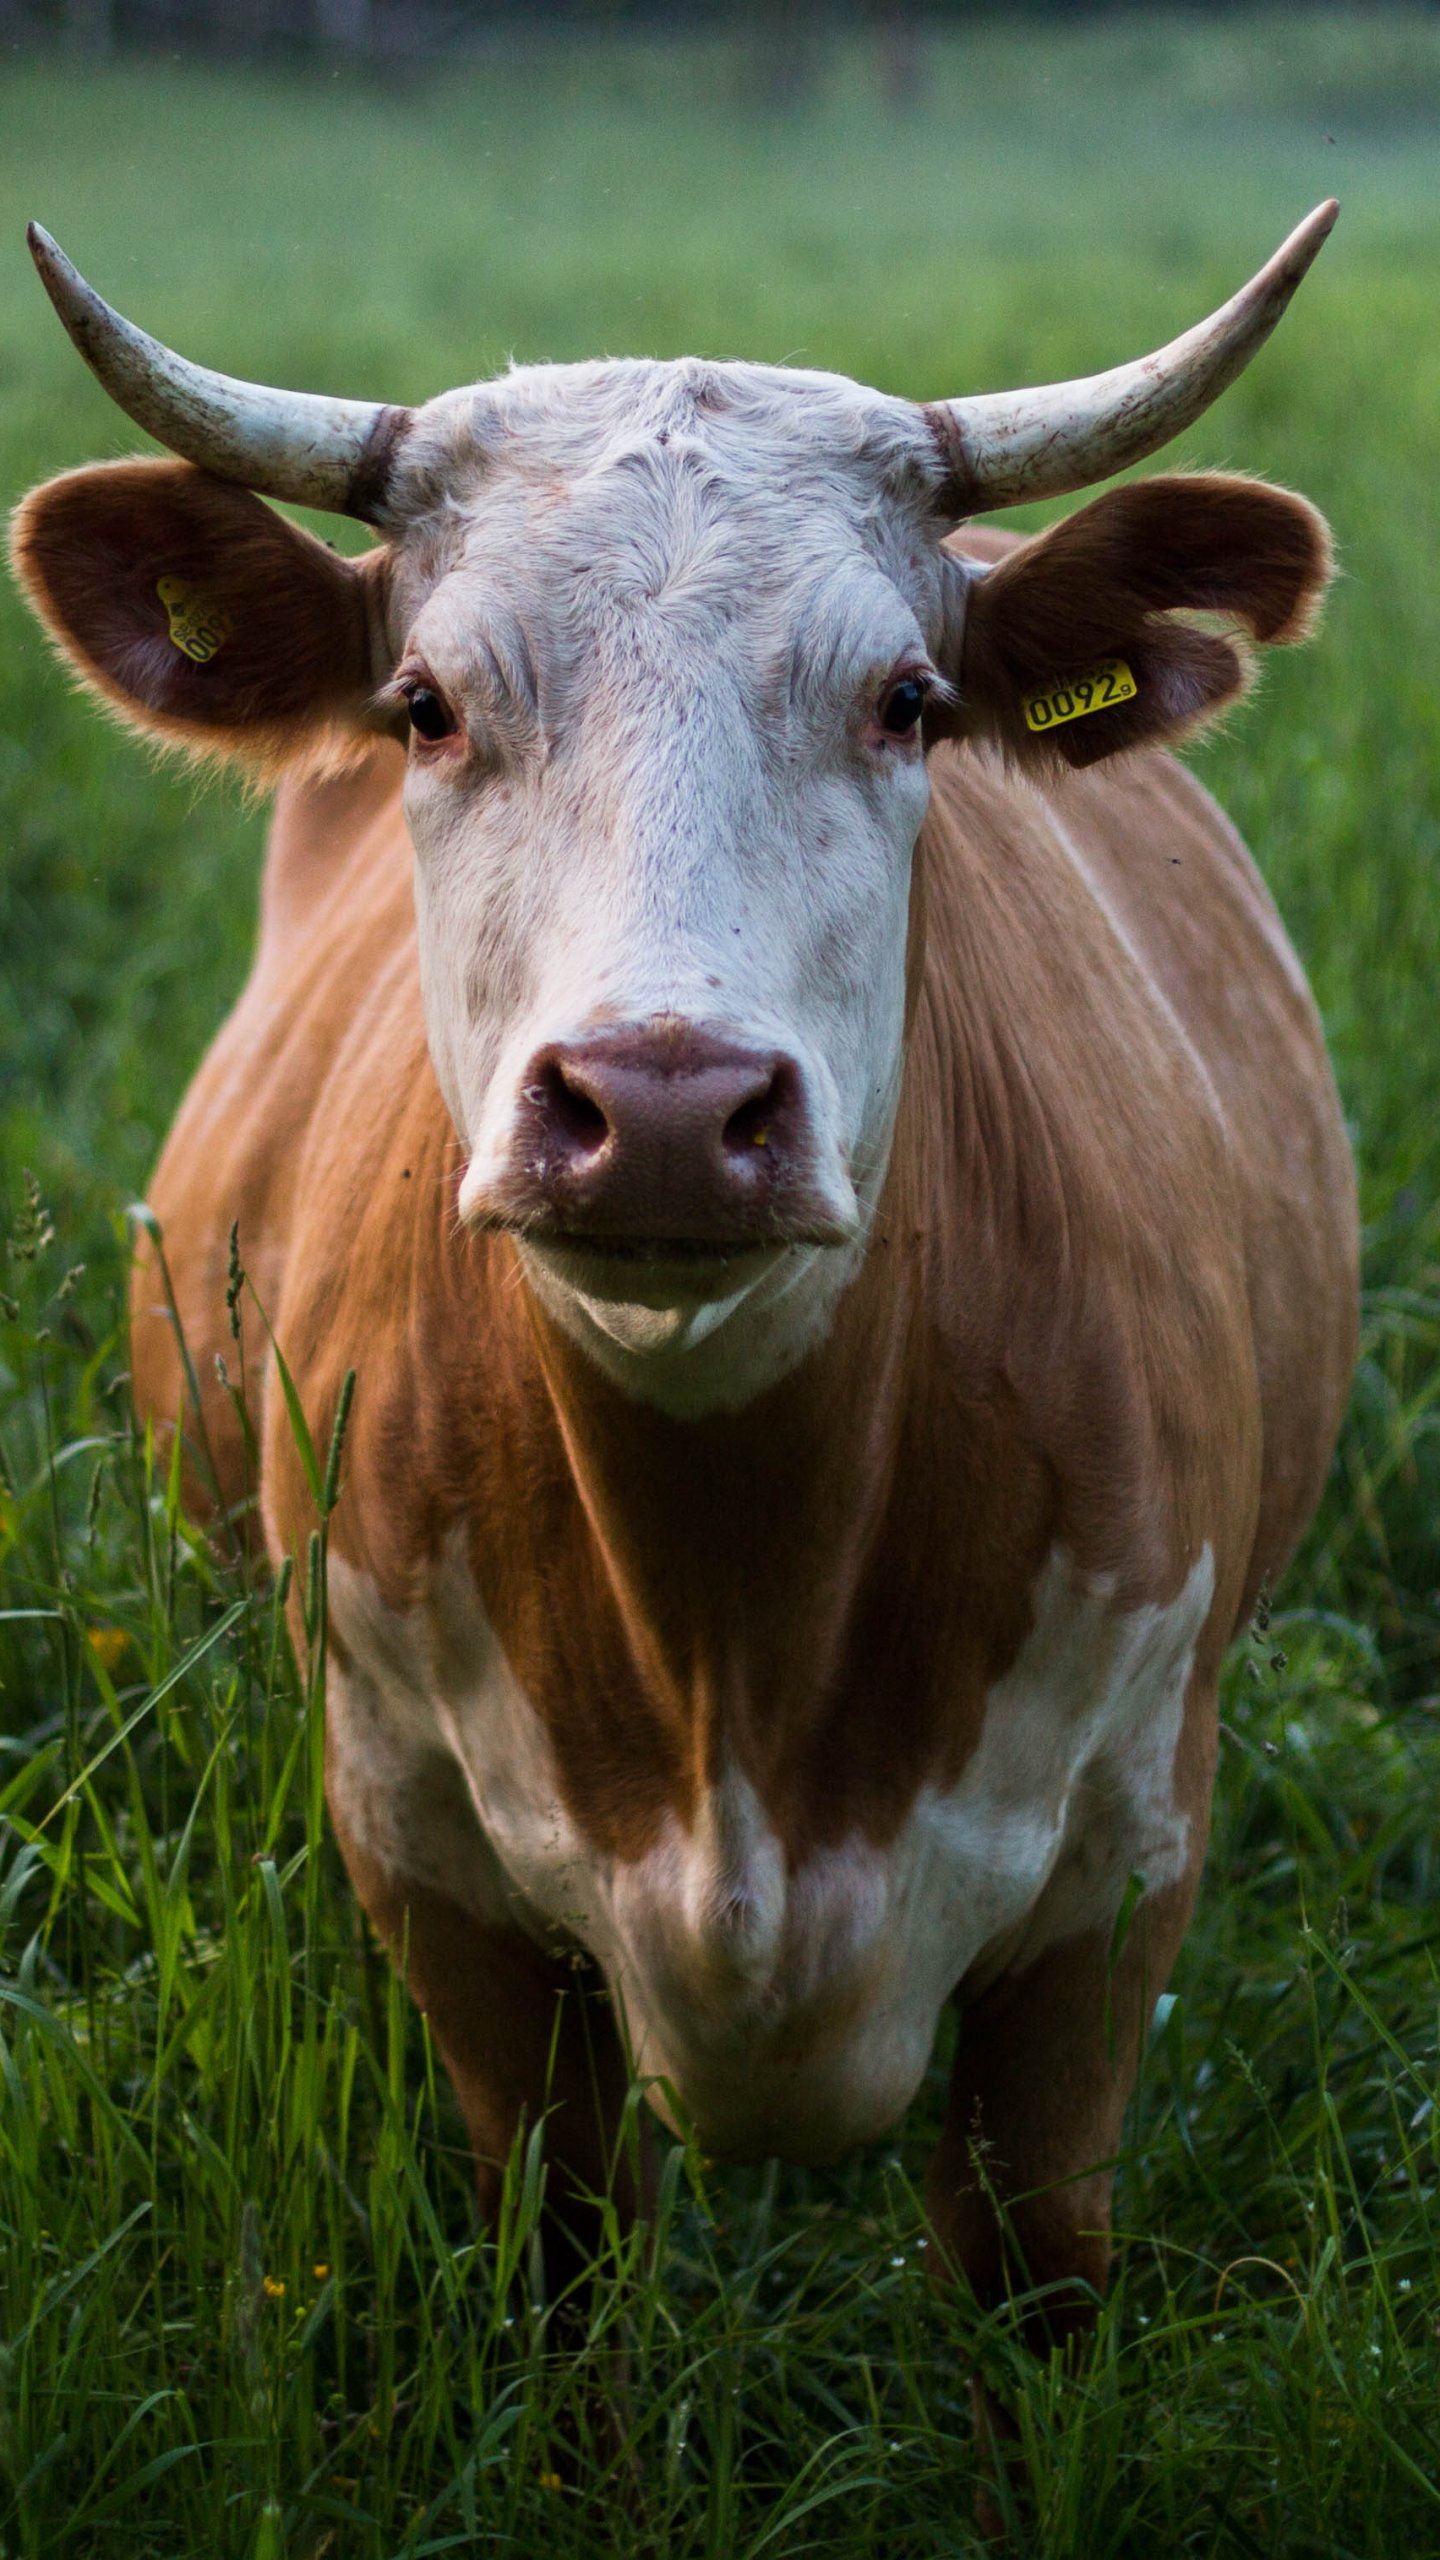 Cow in Grass Wallpaper, Android & Desktop Background